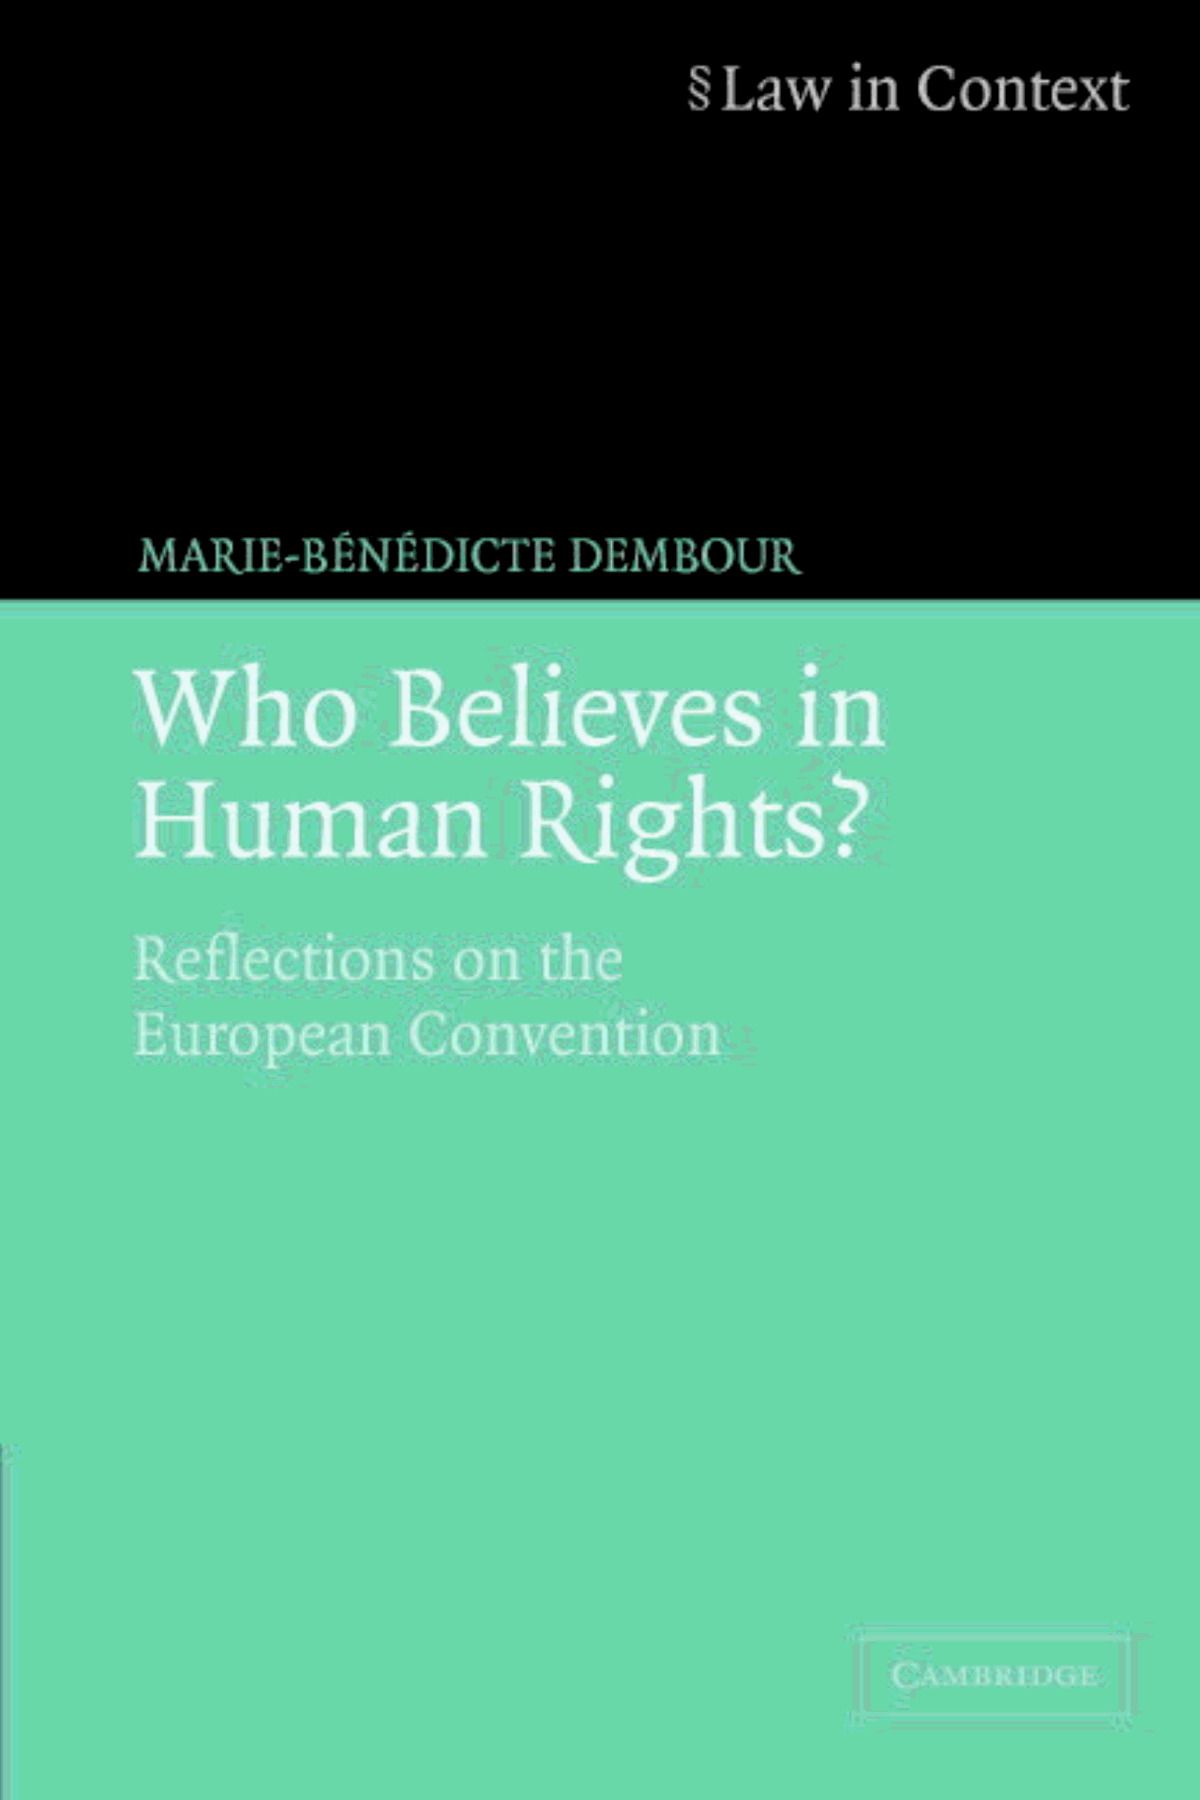 Cambridge University Who Believes in Human Rights?: Reflections on the European Convention (Law in Context)